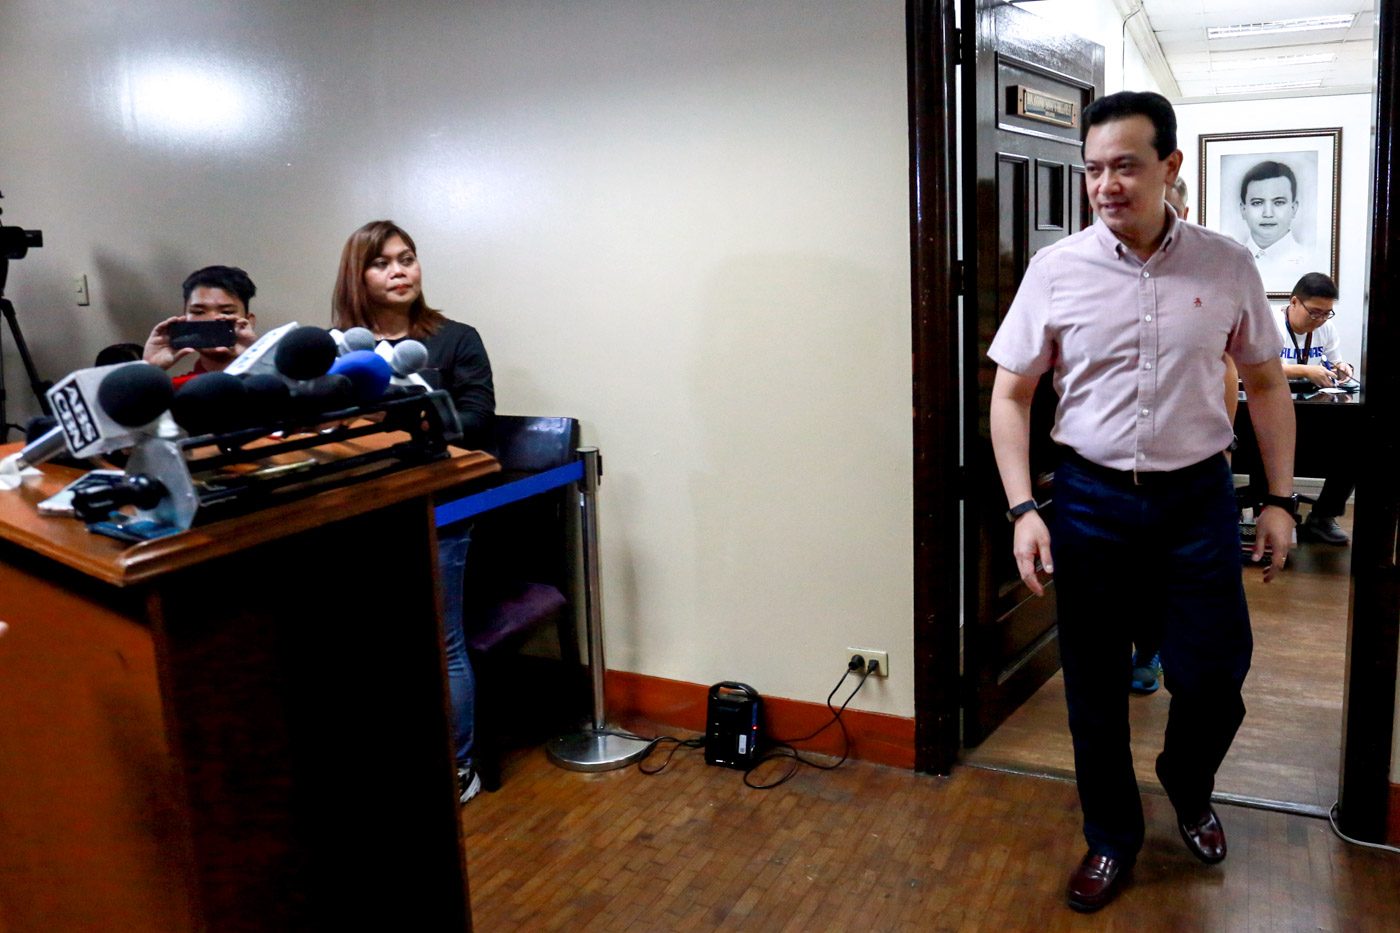 Trillanes amnesty valid, says ex-defense exec who backed it